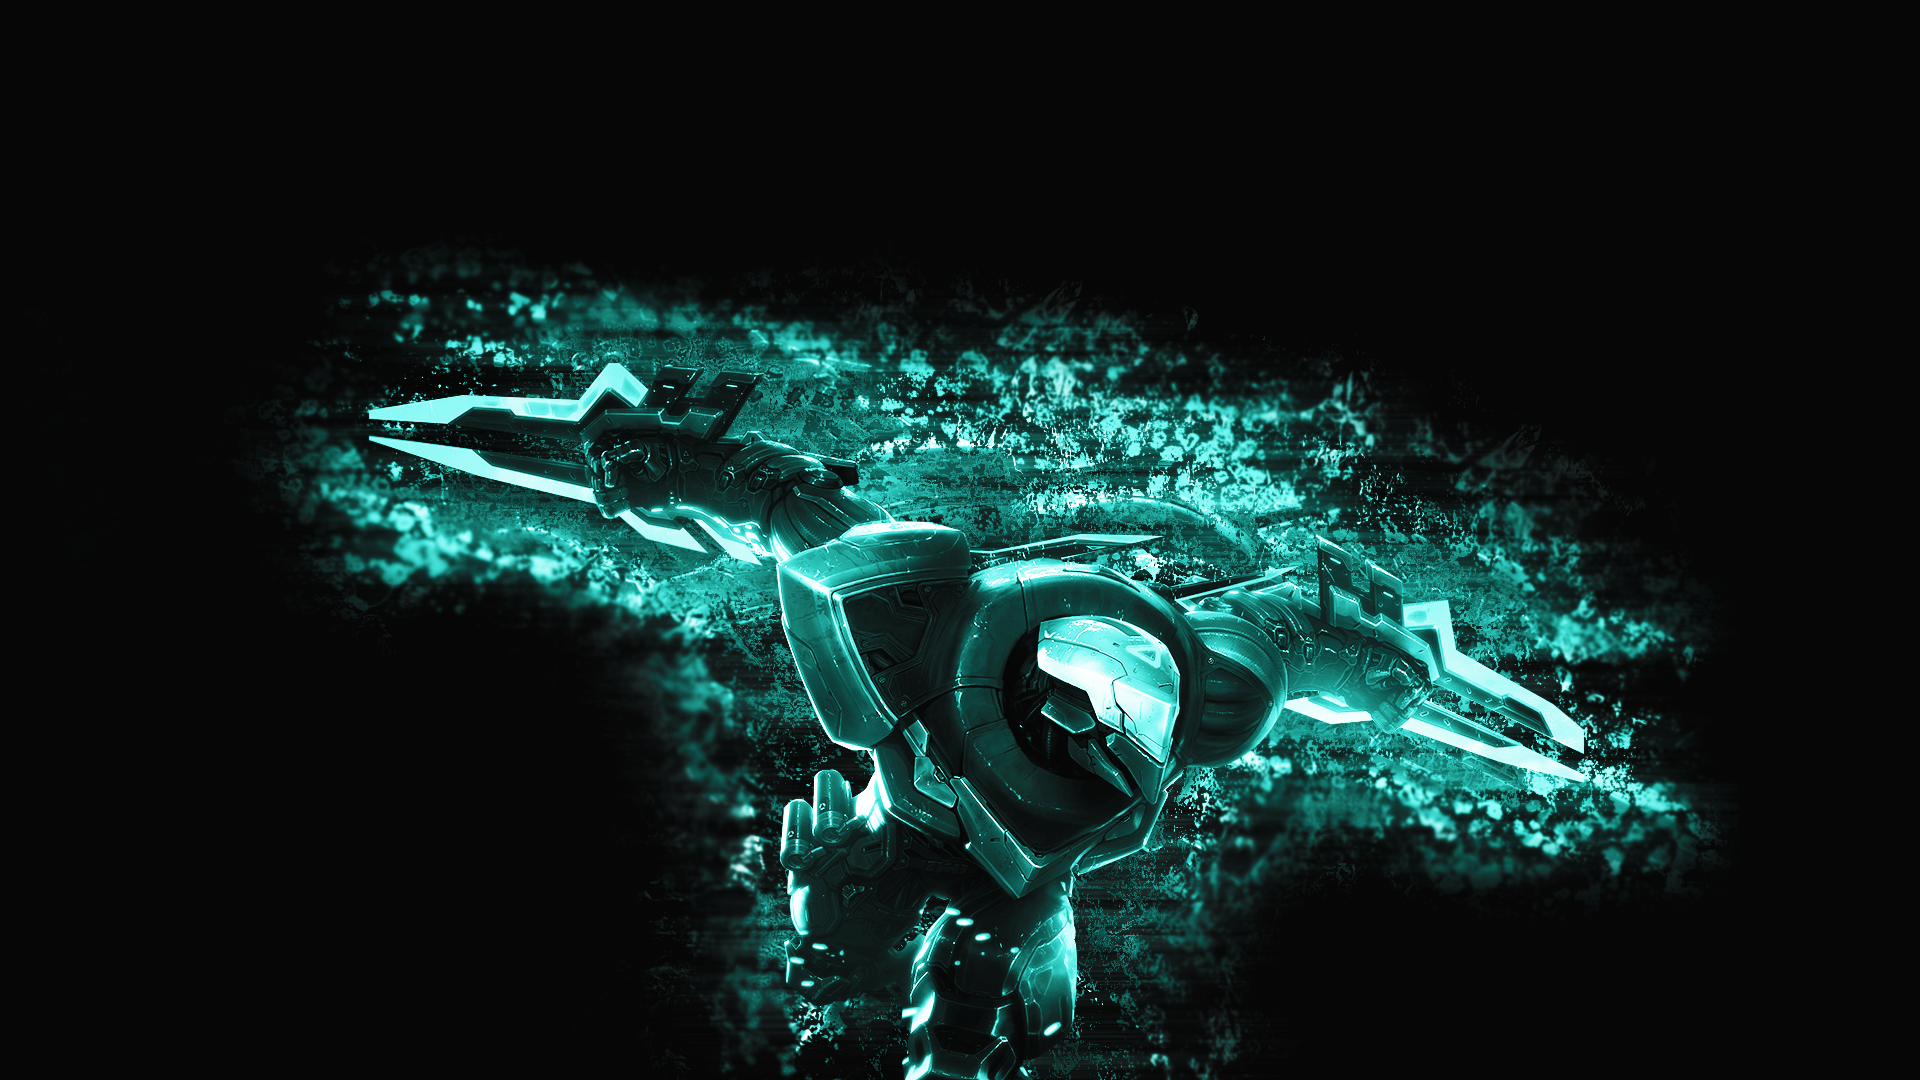 Project Zed Wallpaper by itsDNS on DeviantArt